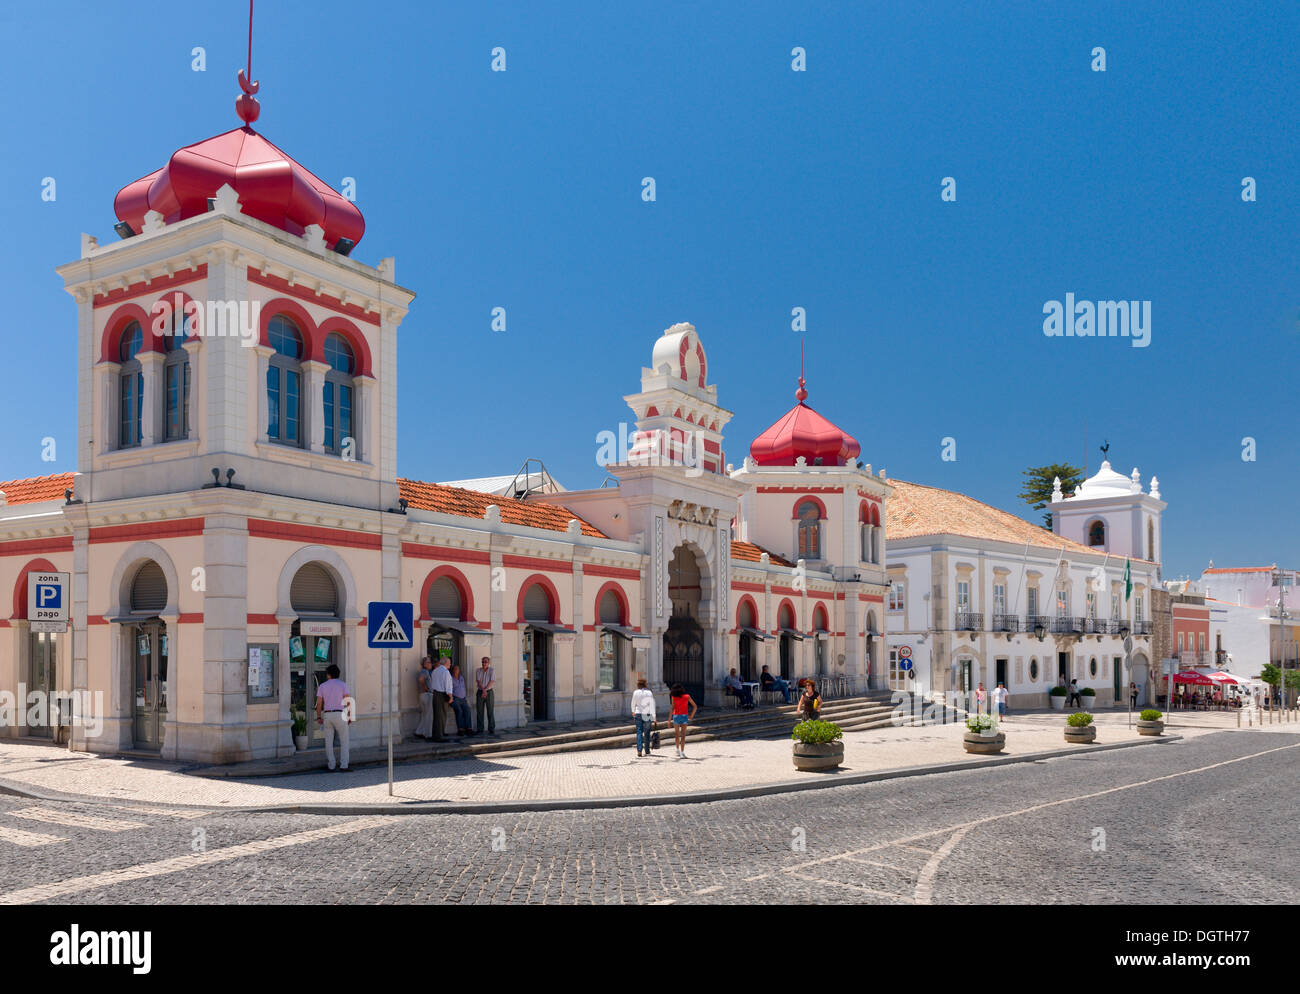 Portugal, the Algarve, Loulé town centre. The market building and town hall, Stock Photo